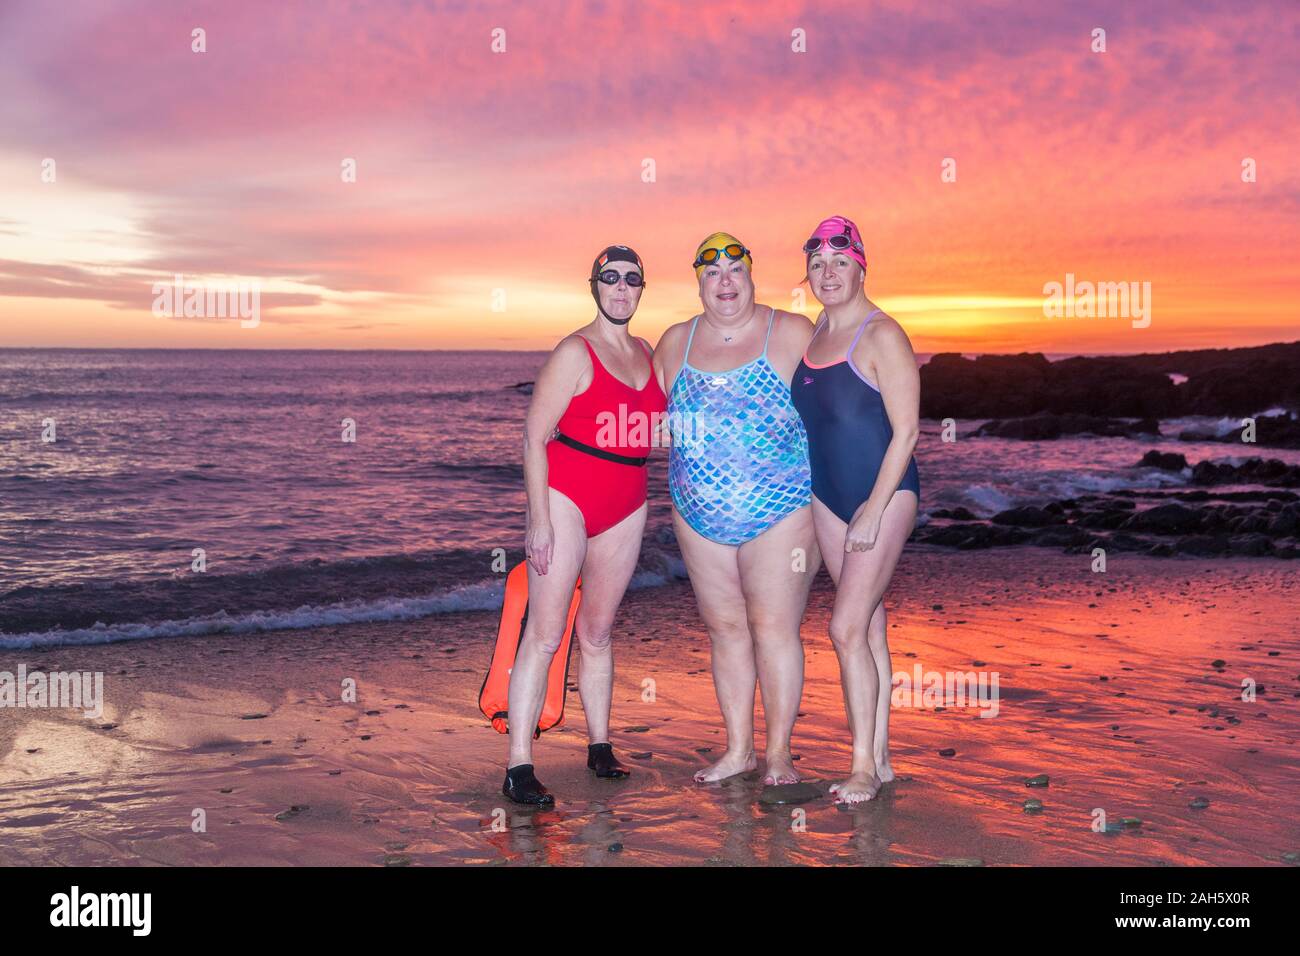 Myrtleville, Cork, Ireland. 25th December, 2019. Marie Watson, Carrigaline and Brenda Sisk from Tivoli preparing to go in for an early morning Christmas Day swim before dawn at Myrtleville, Co. Cork, Ireland.- Credit; David Creedon / Alamy Live News Stock Photo